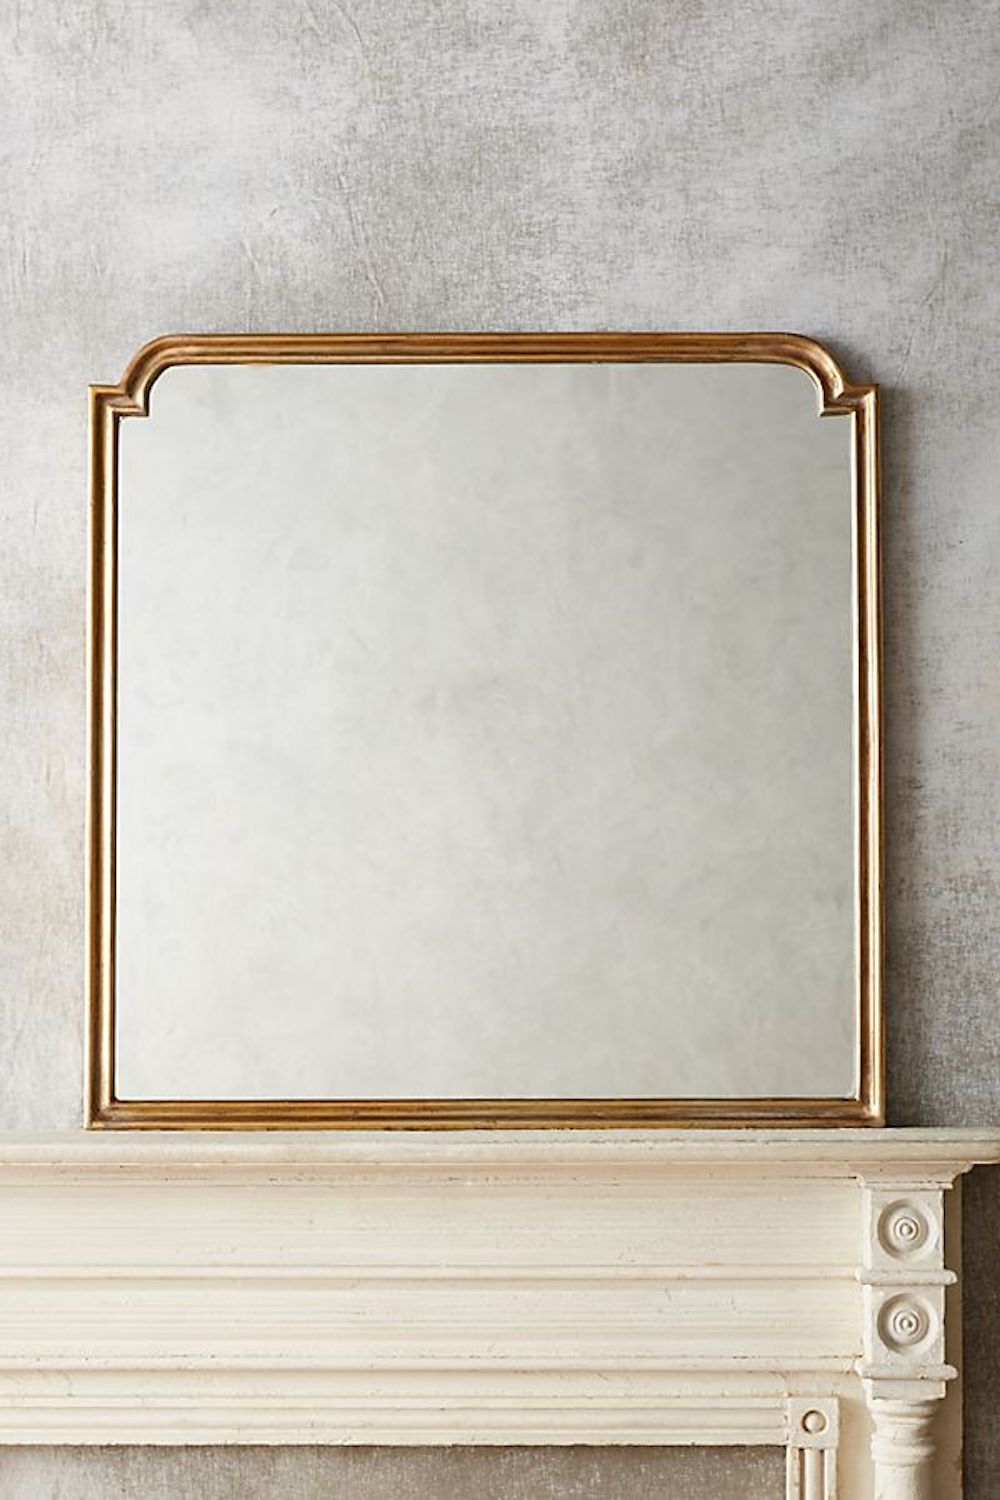 perfect gold mirror for above your mantle